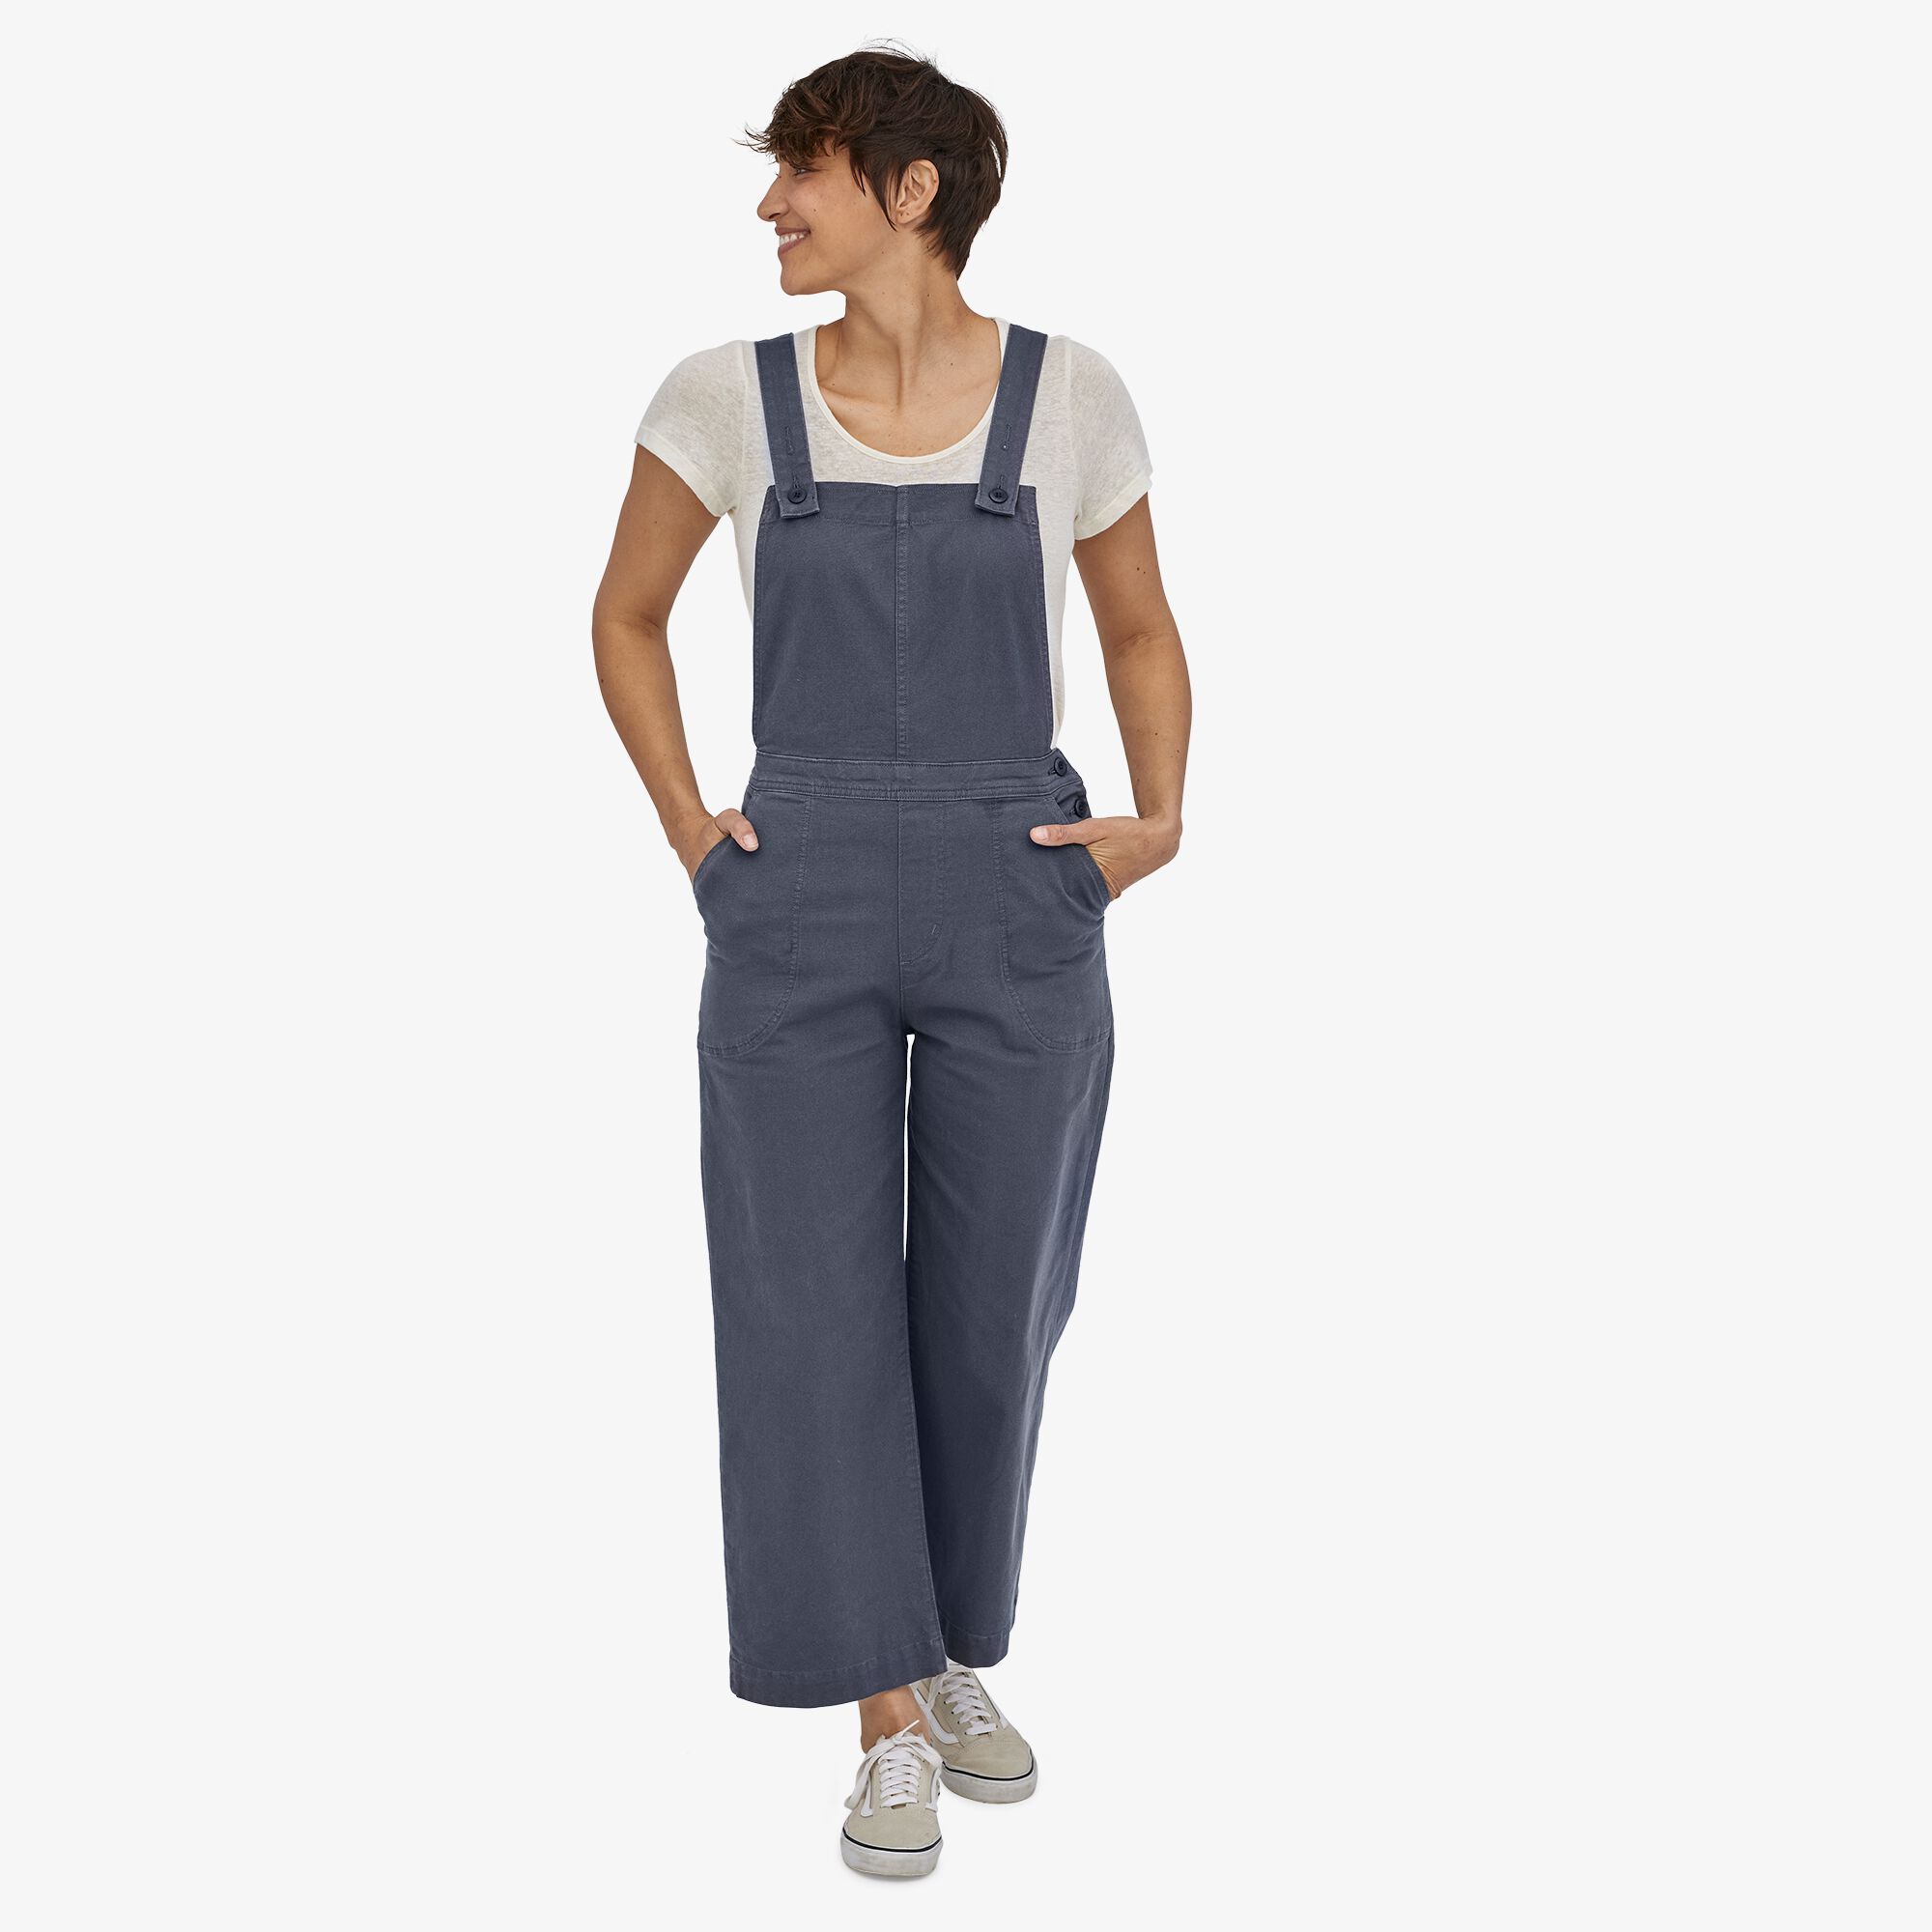 Patagonia Women's Stand Up Cropped Overalls - Organic Cotton, Smolder Blue / 4